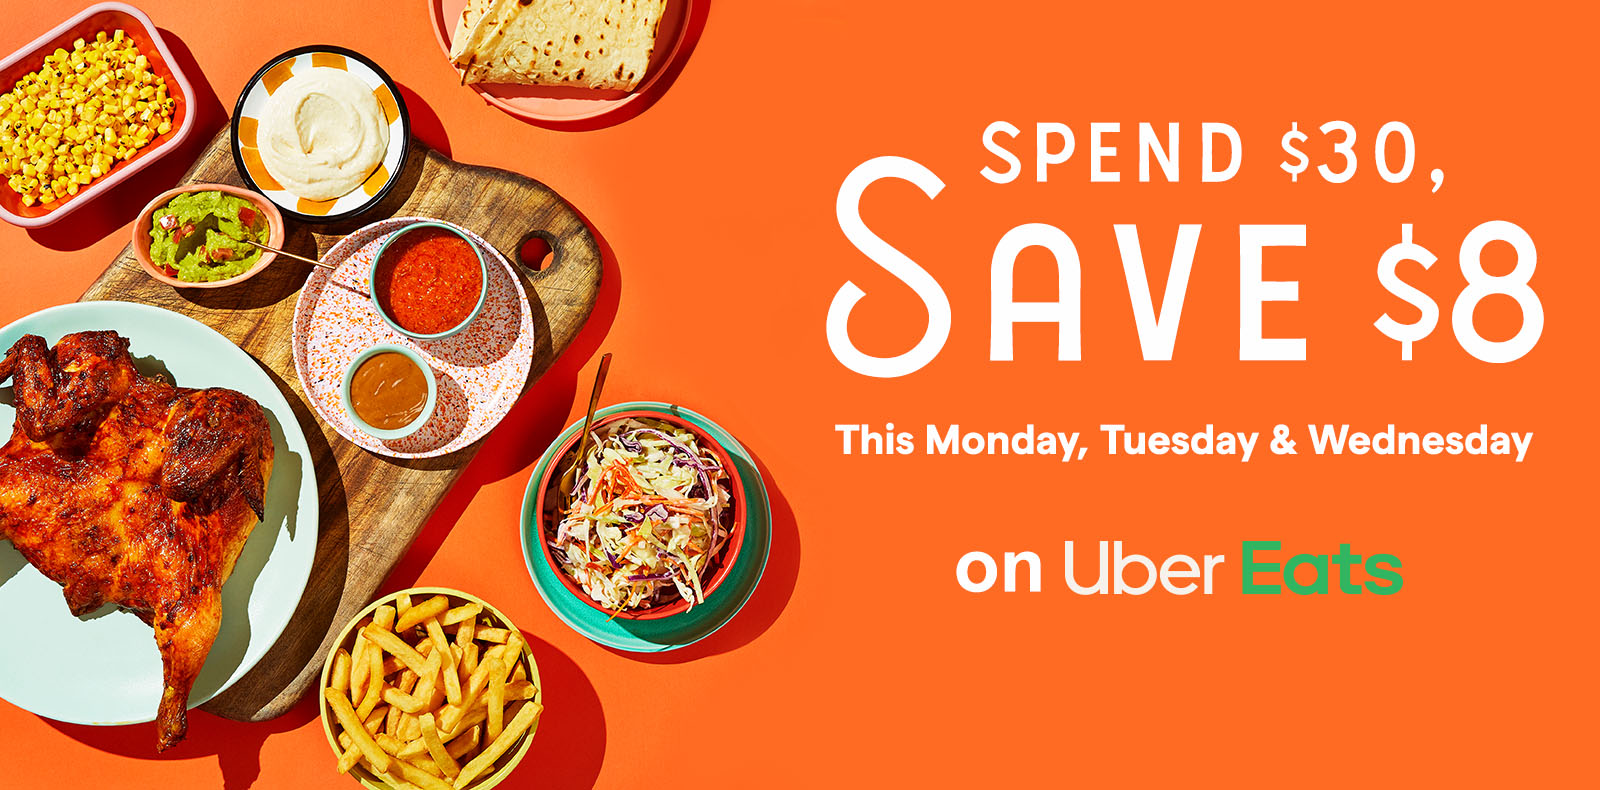 Oporto get $8 OFF when you spend $30 this Monday, Tuesday & Wednesday via Uber Eats